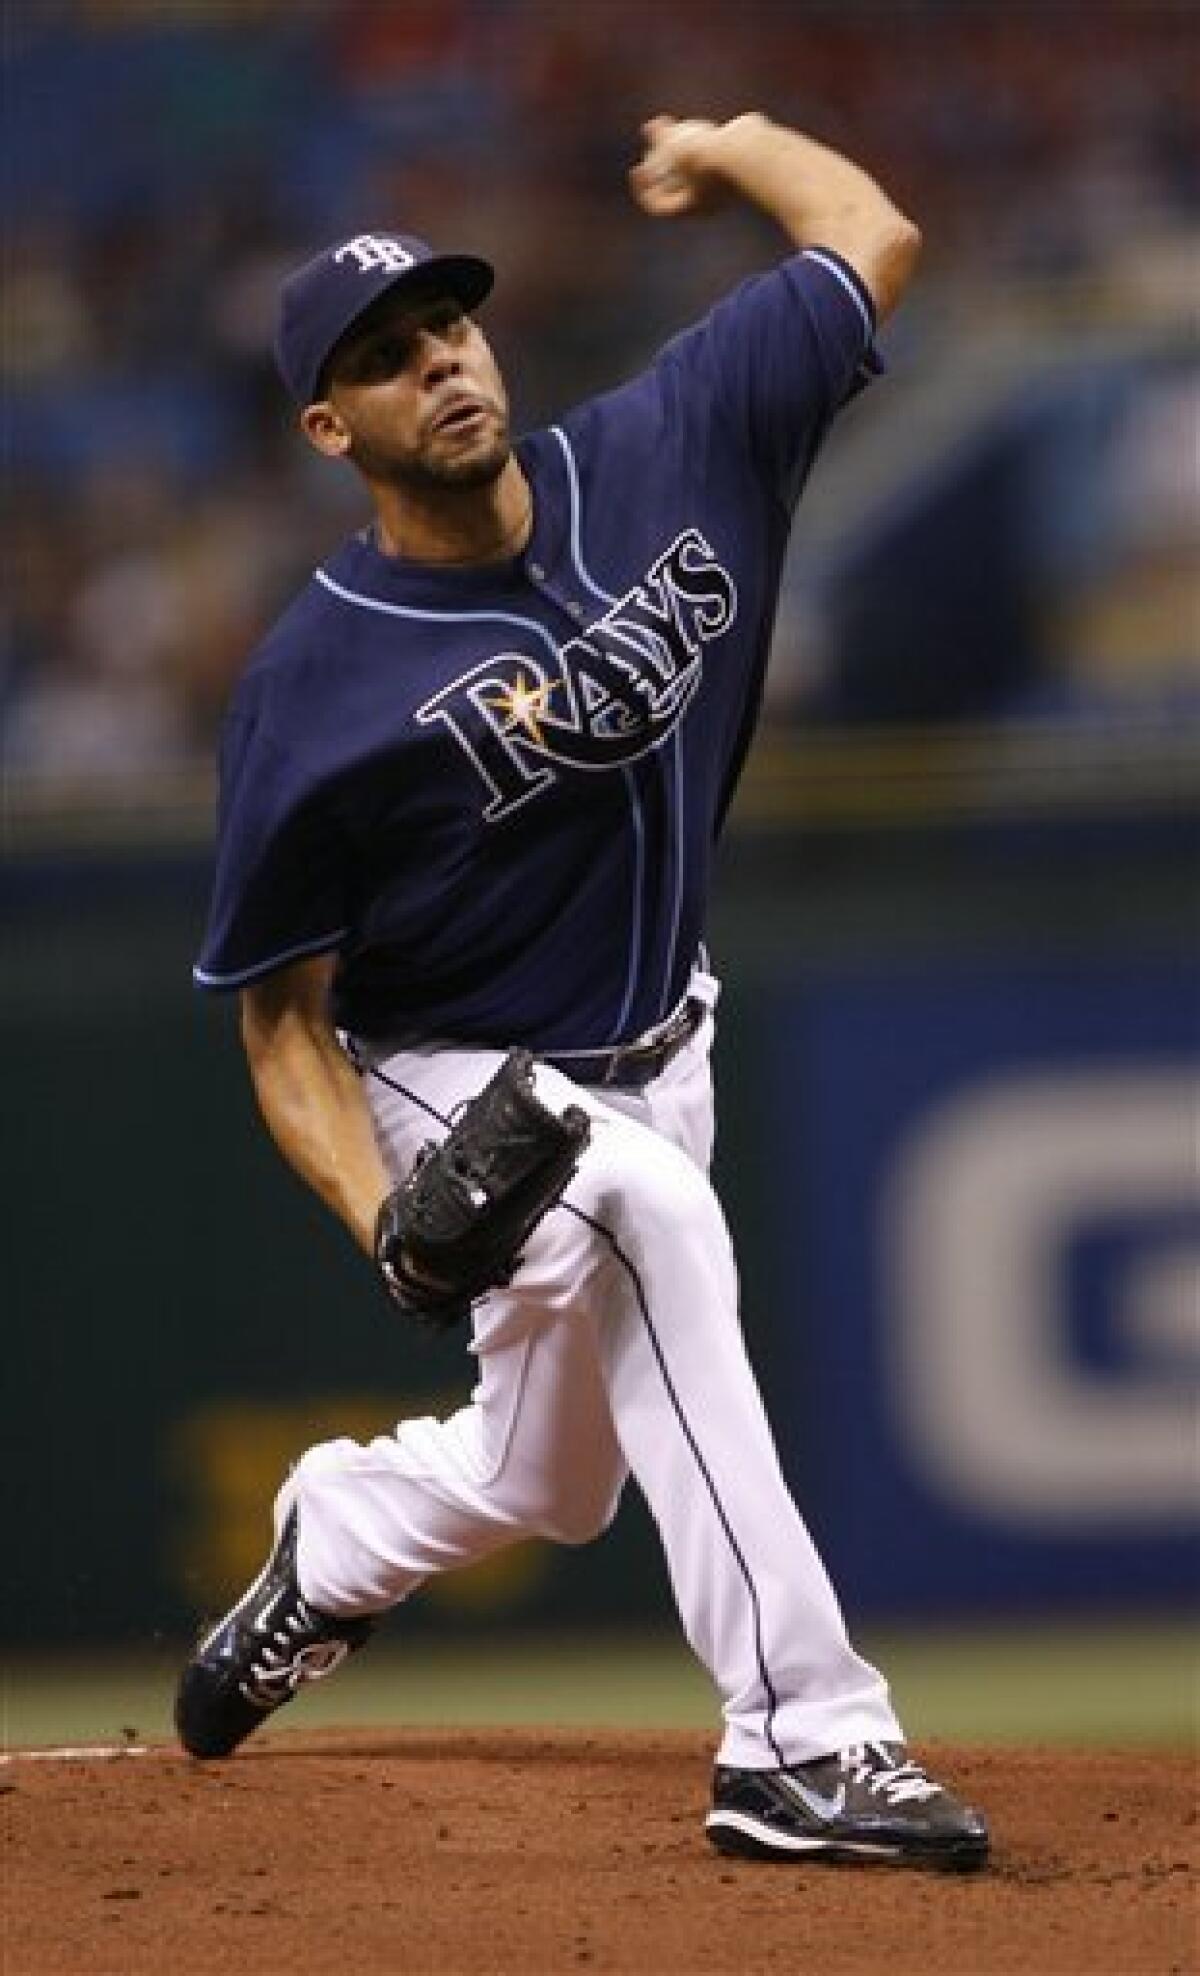 Price, Rays complete sweep of Halladay, Blue Jays - The San Diego